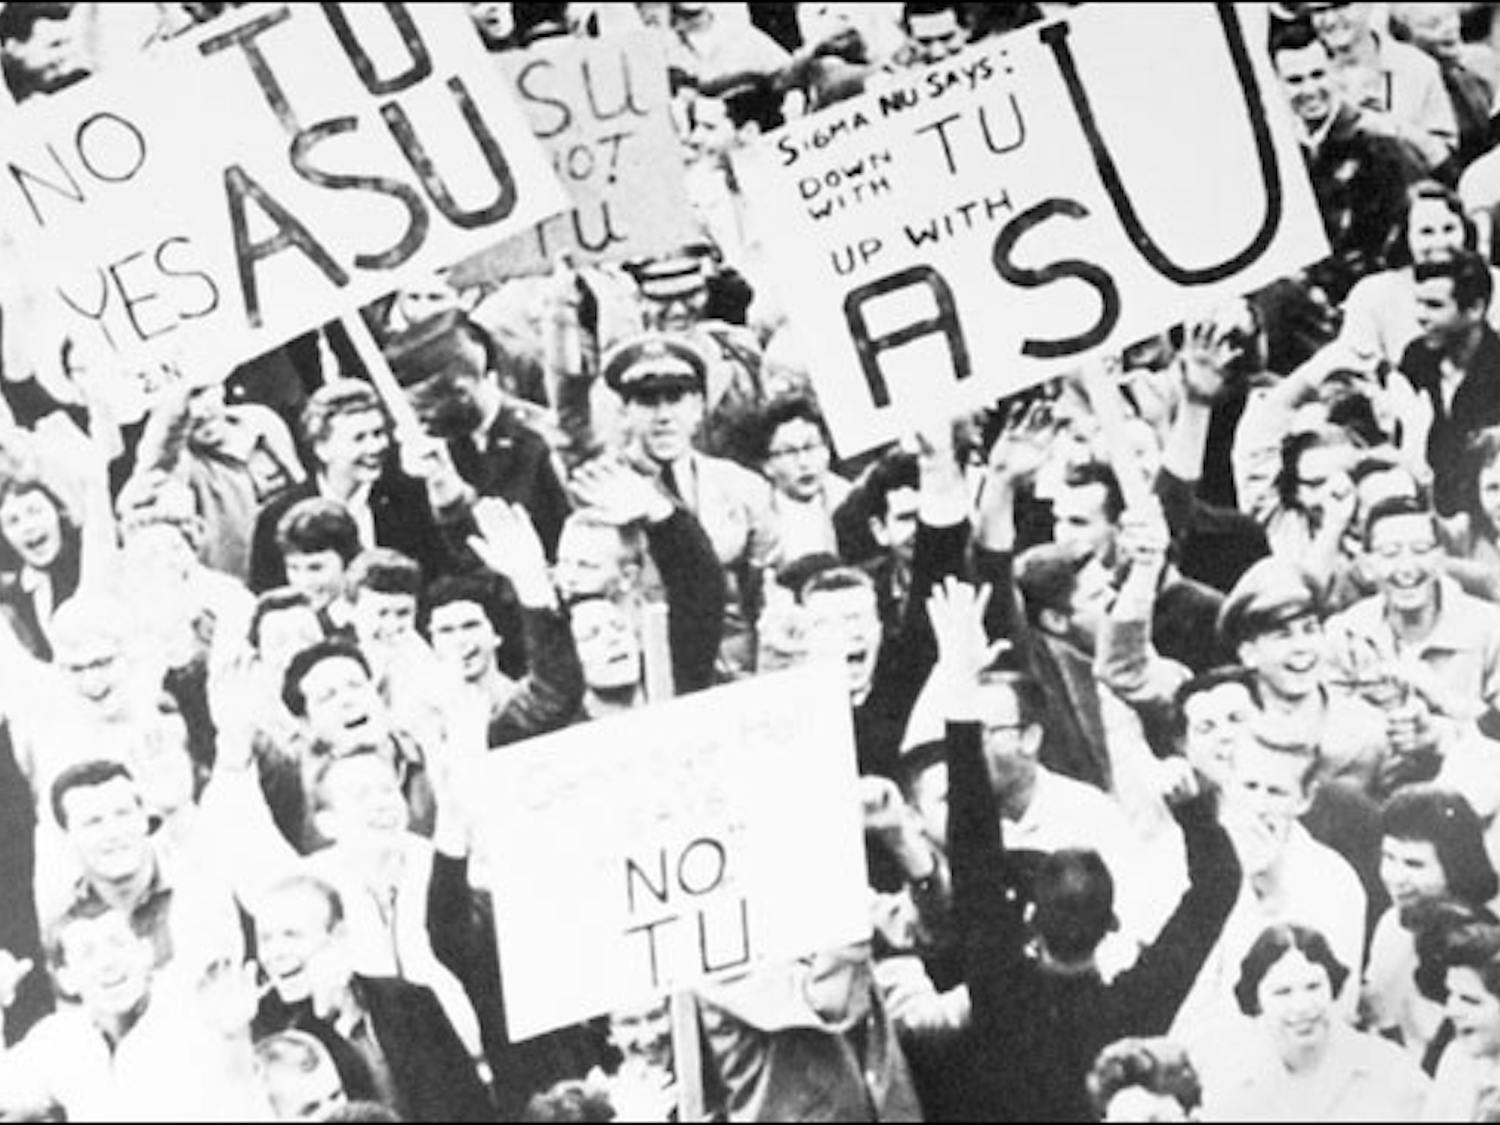 Students rally to change the name of Arizona State College to Arizona State University in 1958. (University Archives Photograph/ASU Archives) 